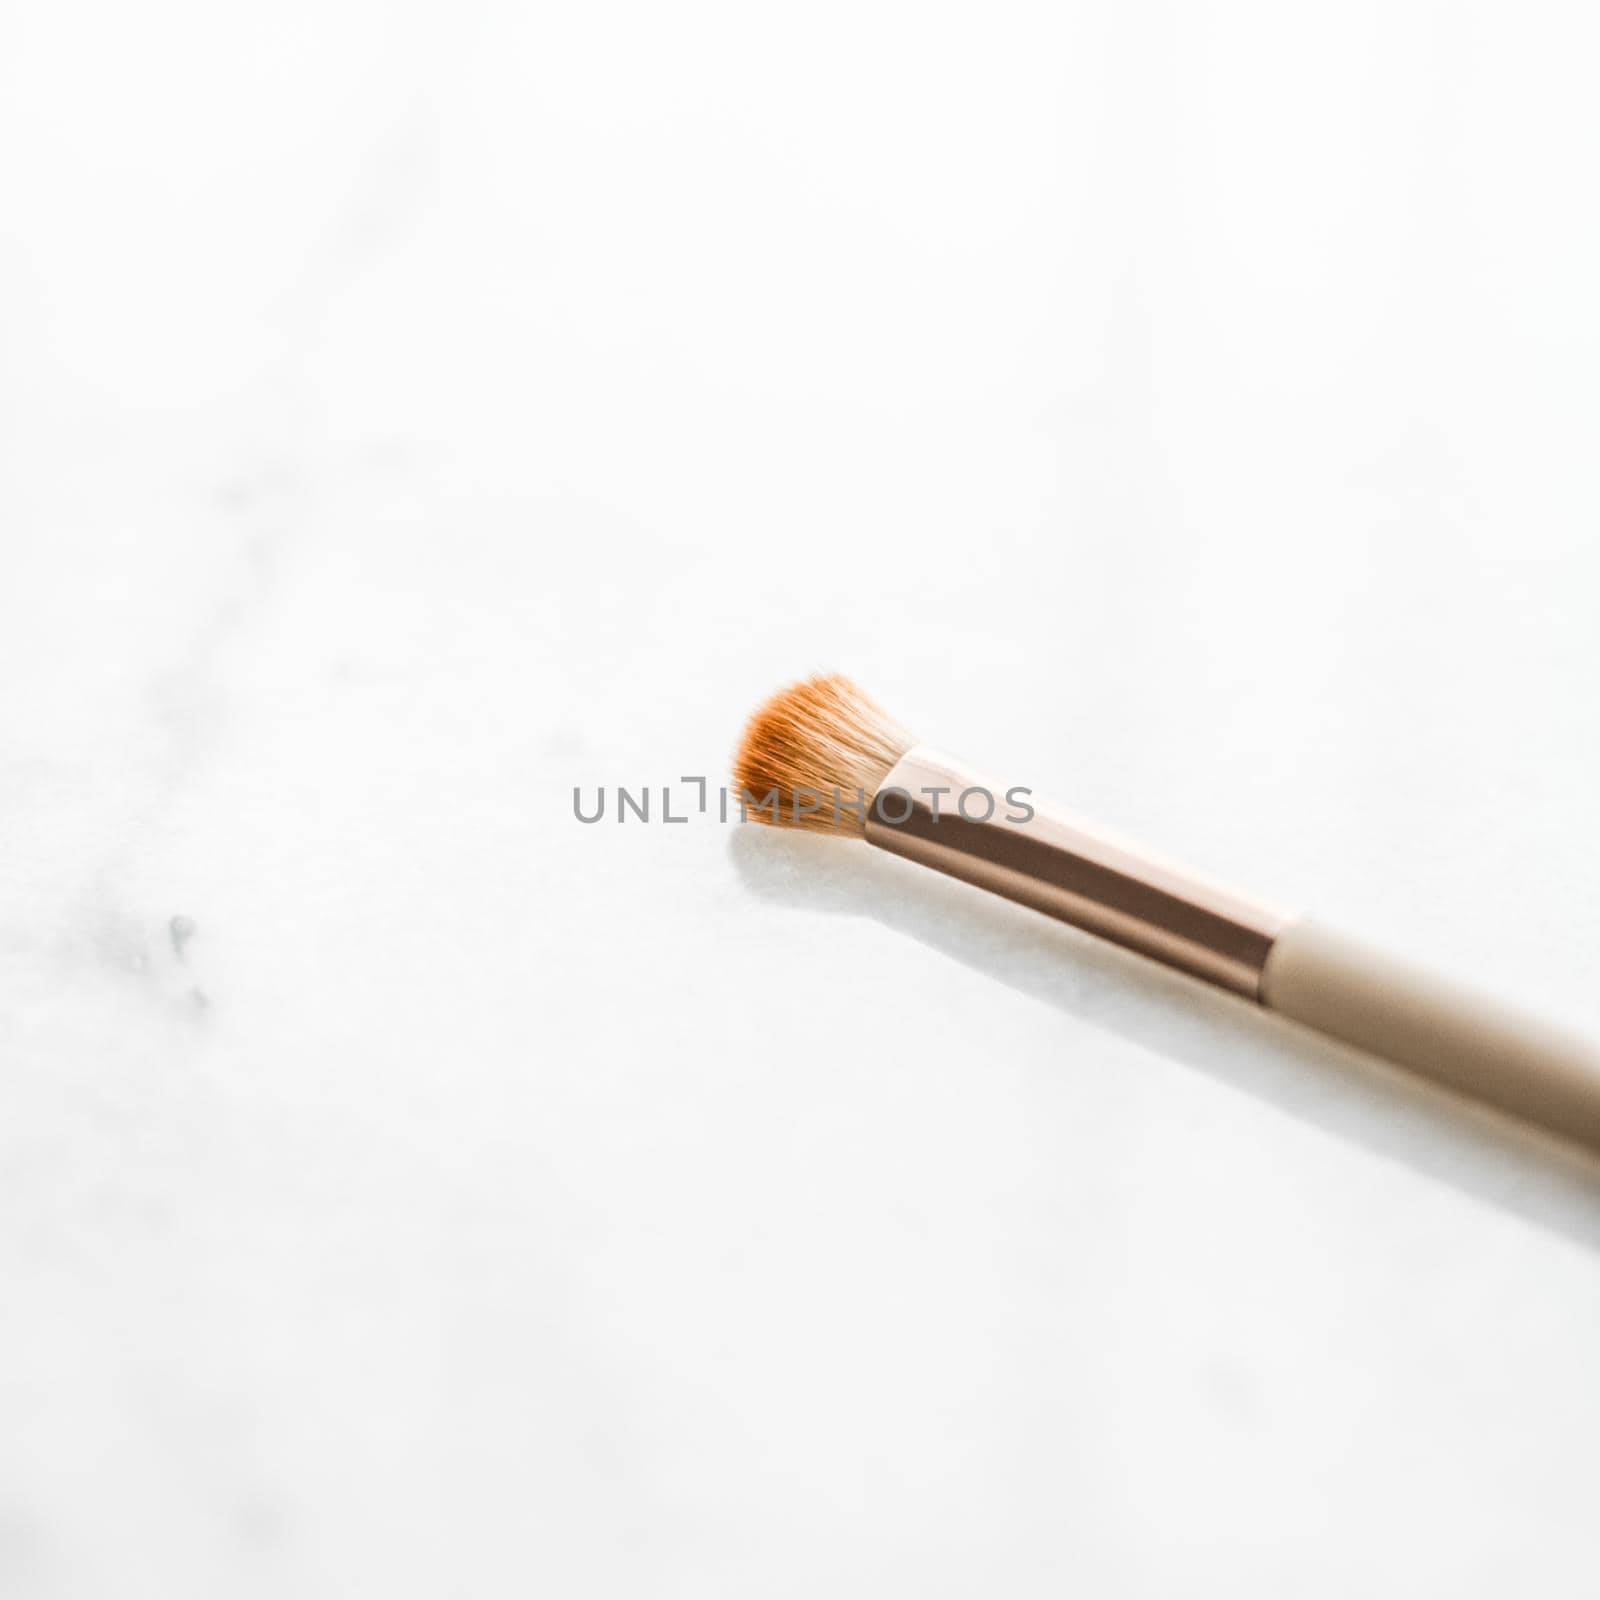 Cosmetic branding, blog and girly concept - Make-up brush for foundation base face contouring on marble background, mua cosmetics as glamour makeup artist product for luxury beauty brand art design